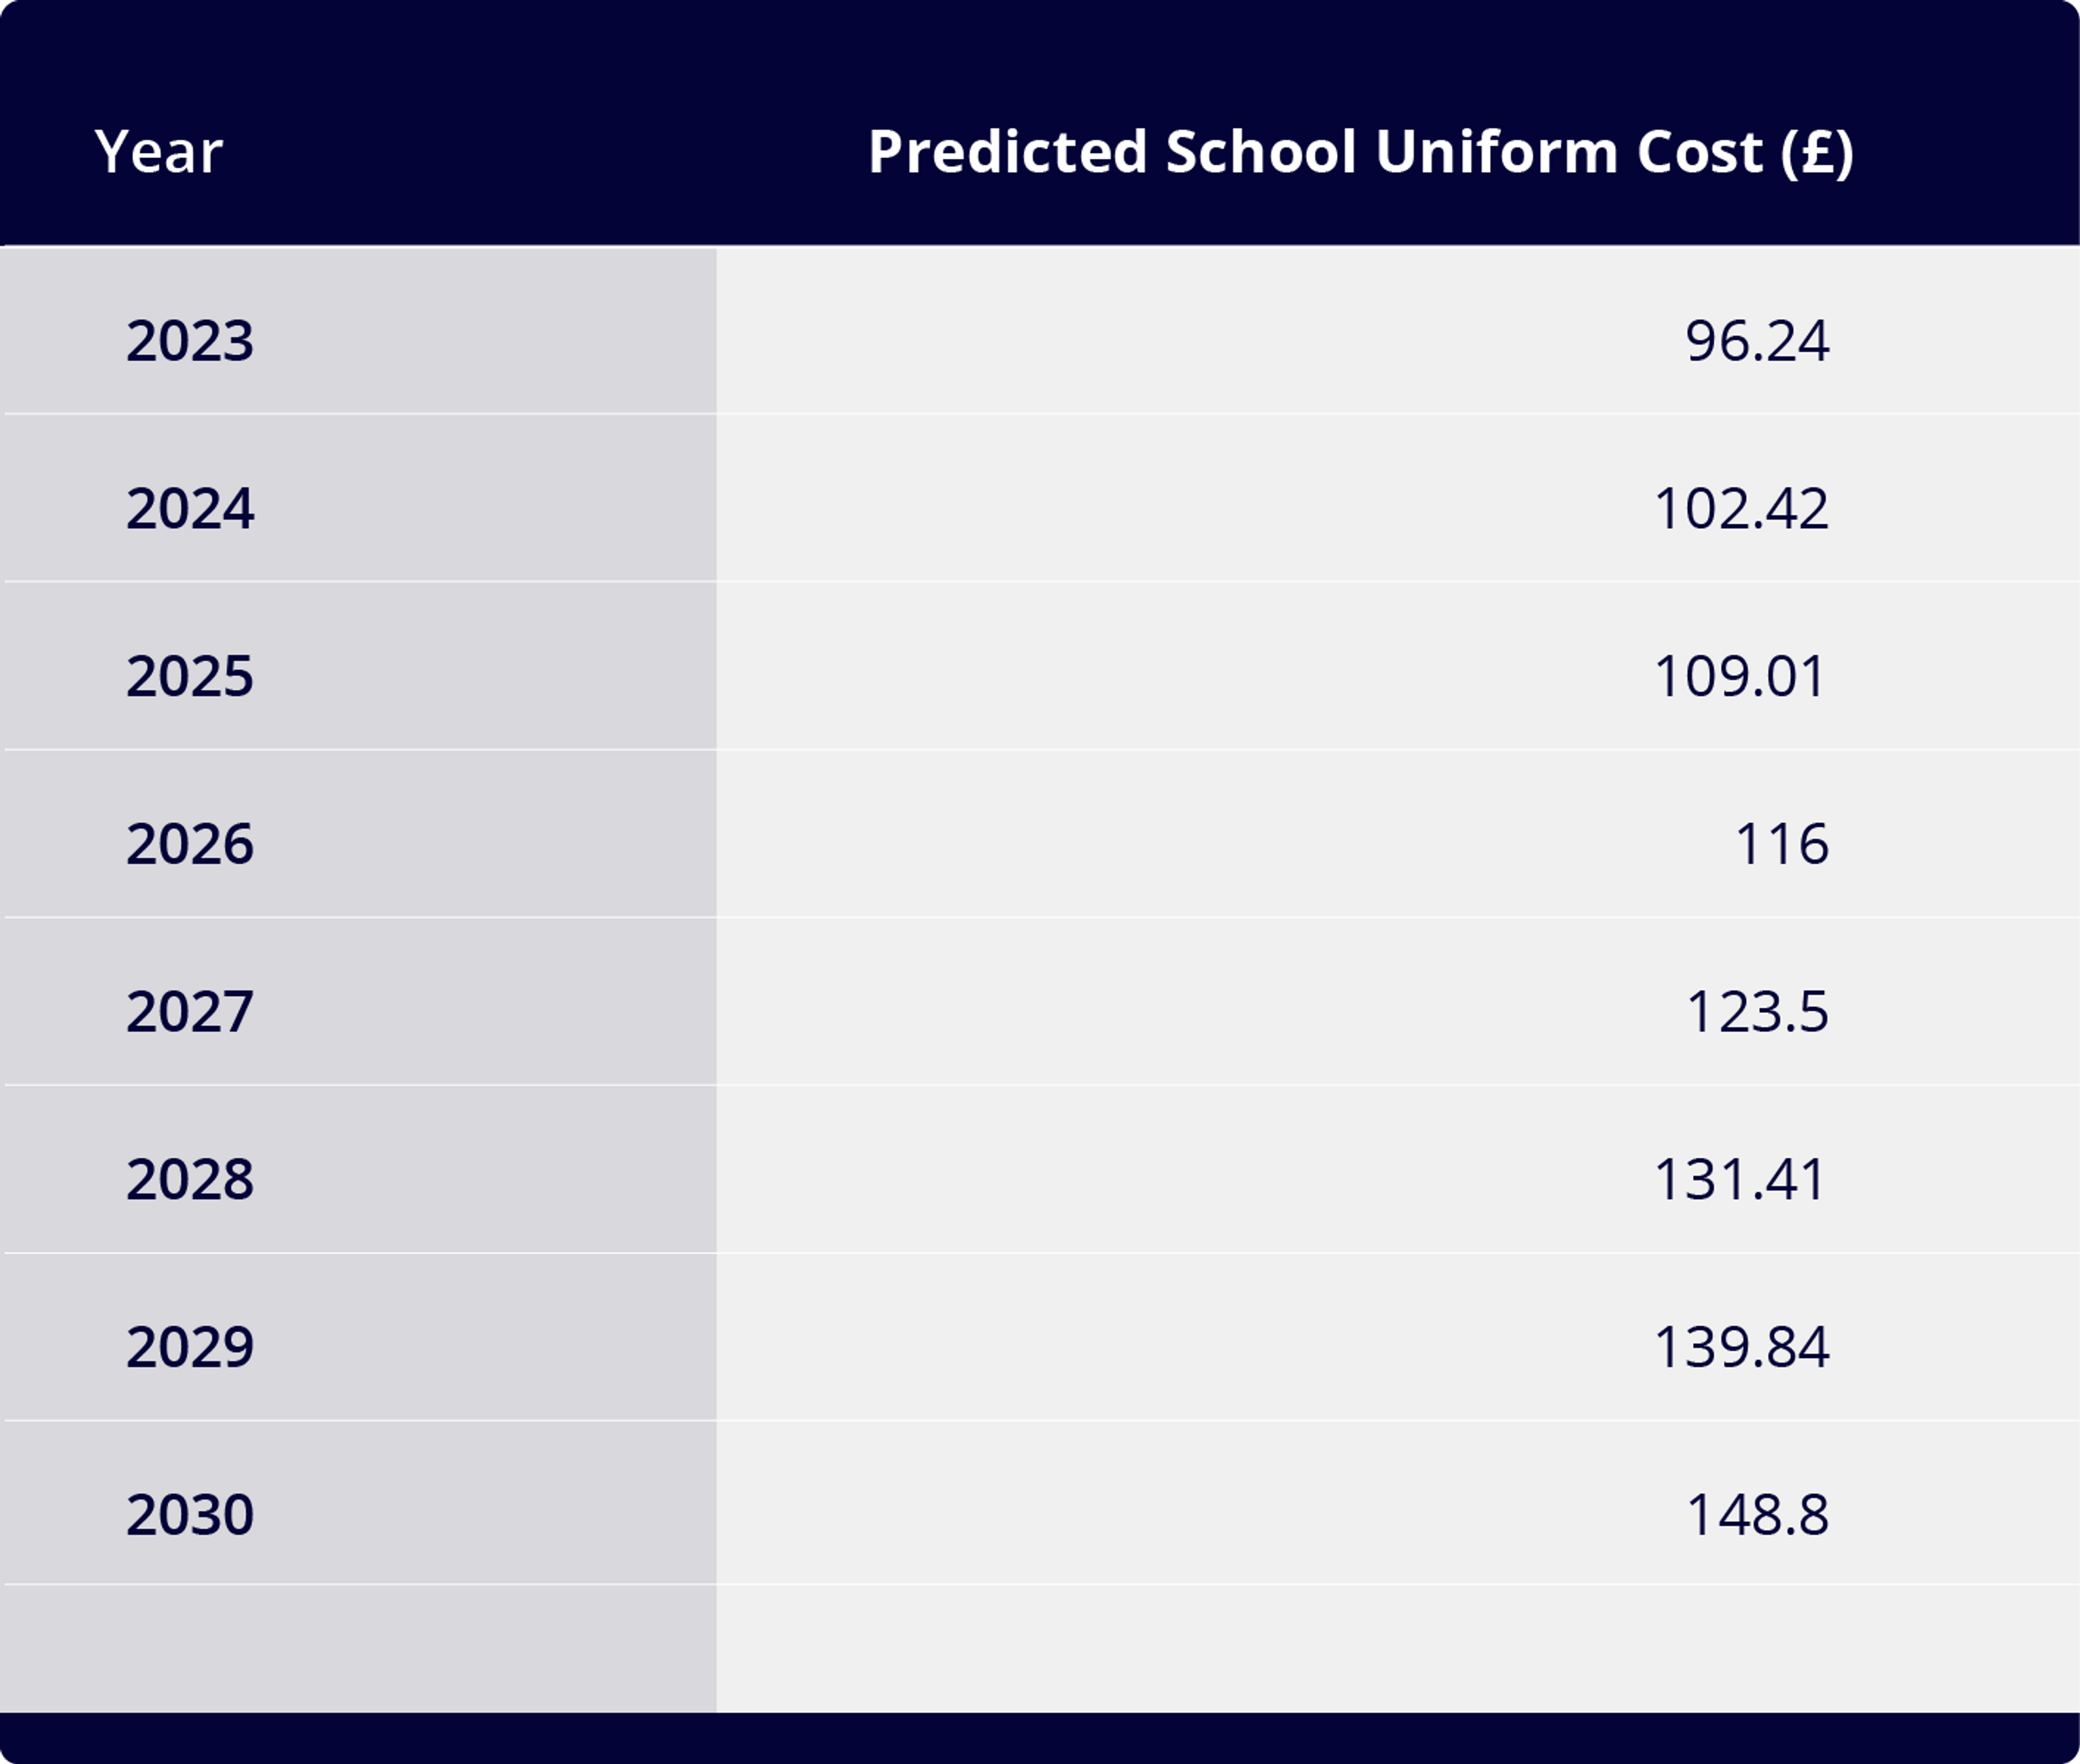 A table showing uniform cost increases between 2023 and 2030